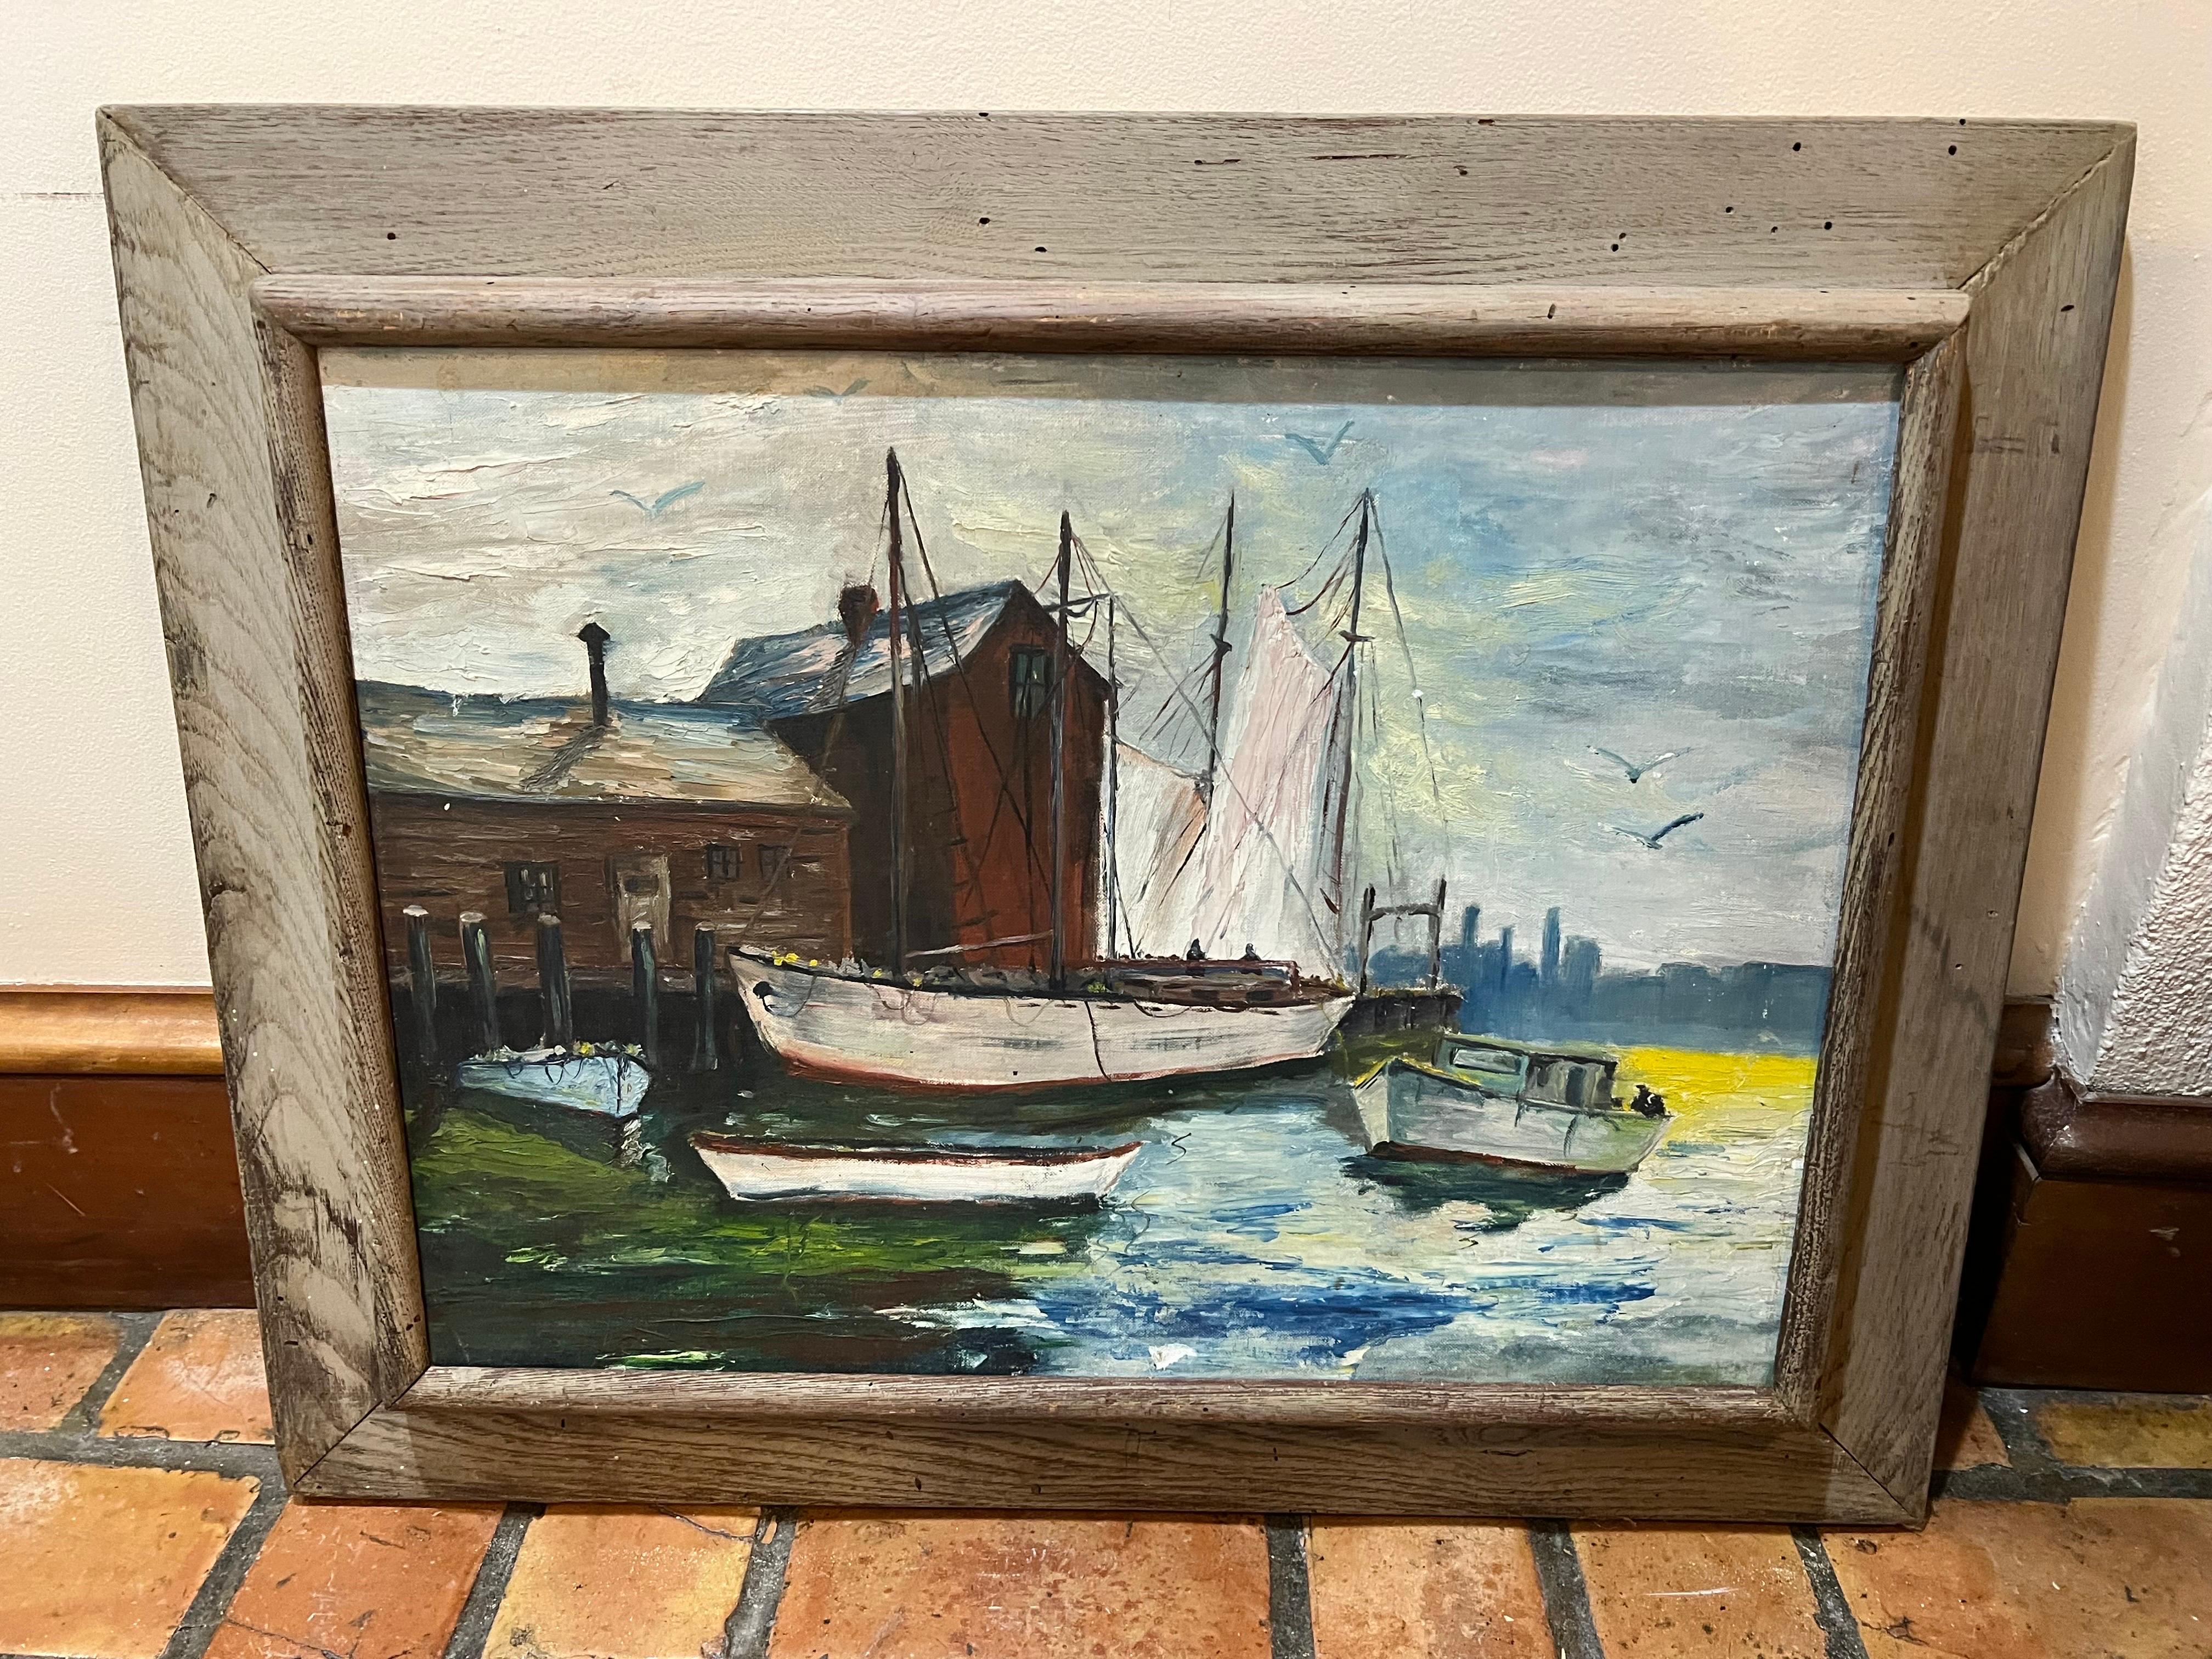 Mid Century Painting of boats in Harbor. Framed in a mid century driftwood color frame. This item can ship parcel domestically for $49.